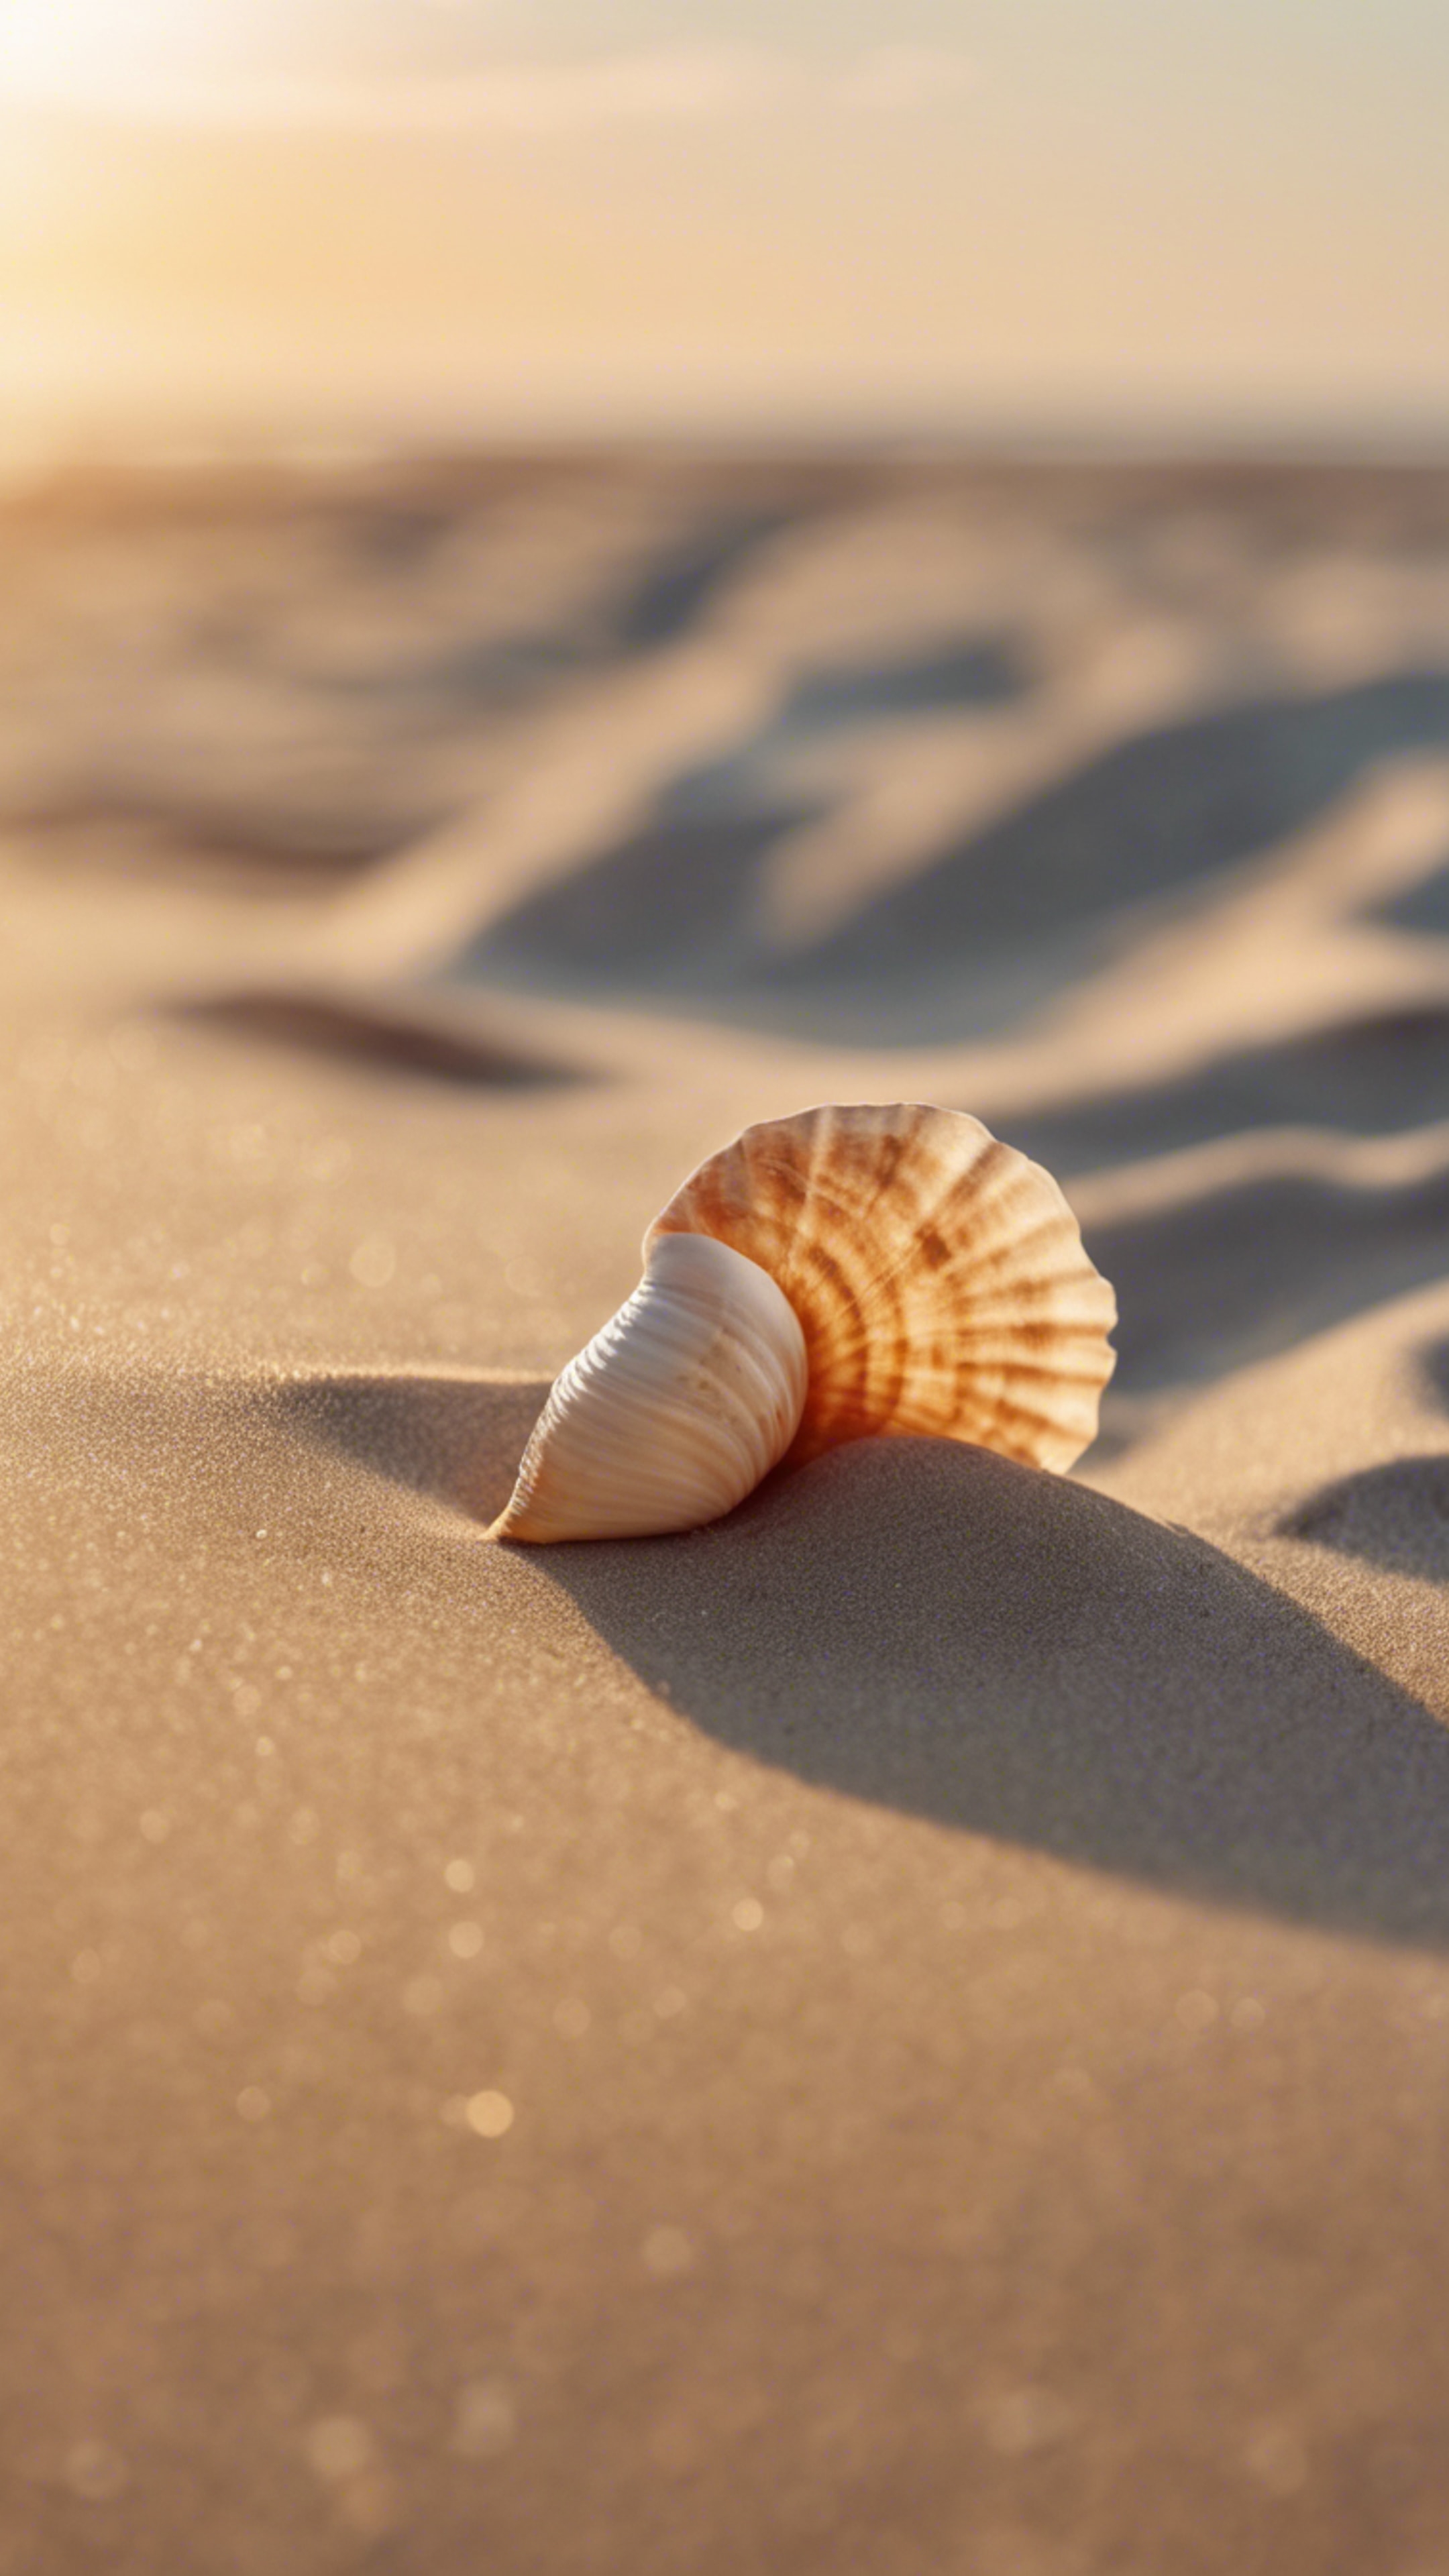 A sandy beach at sunrise, with a lonely seashell on the smooth, cool beige sand. Тапет[f397365f3b8642f18a02]